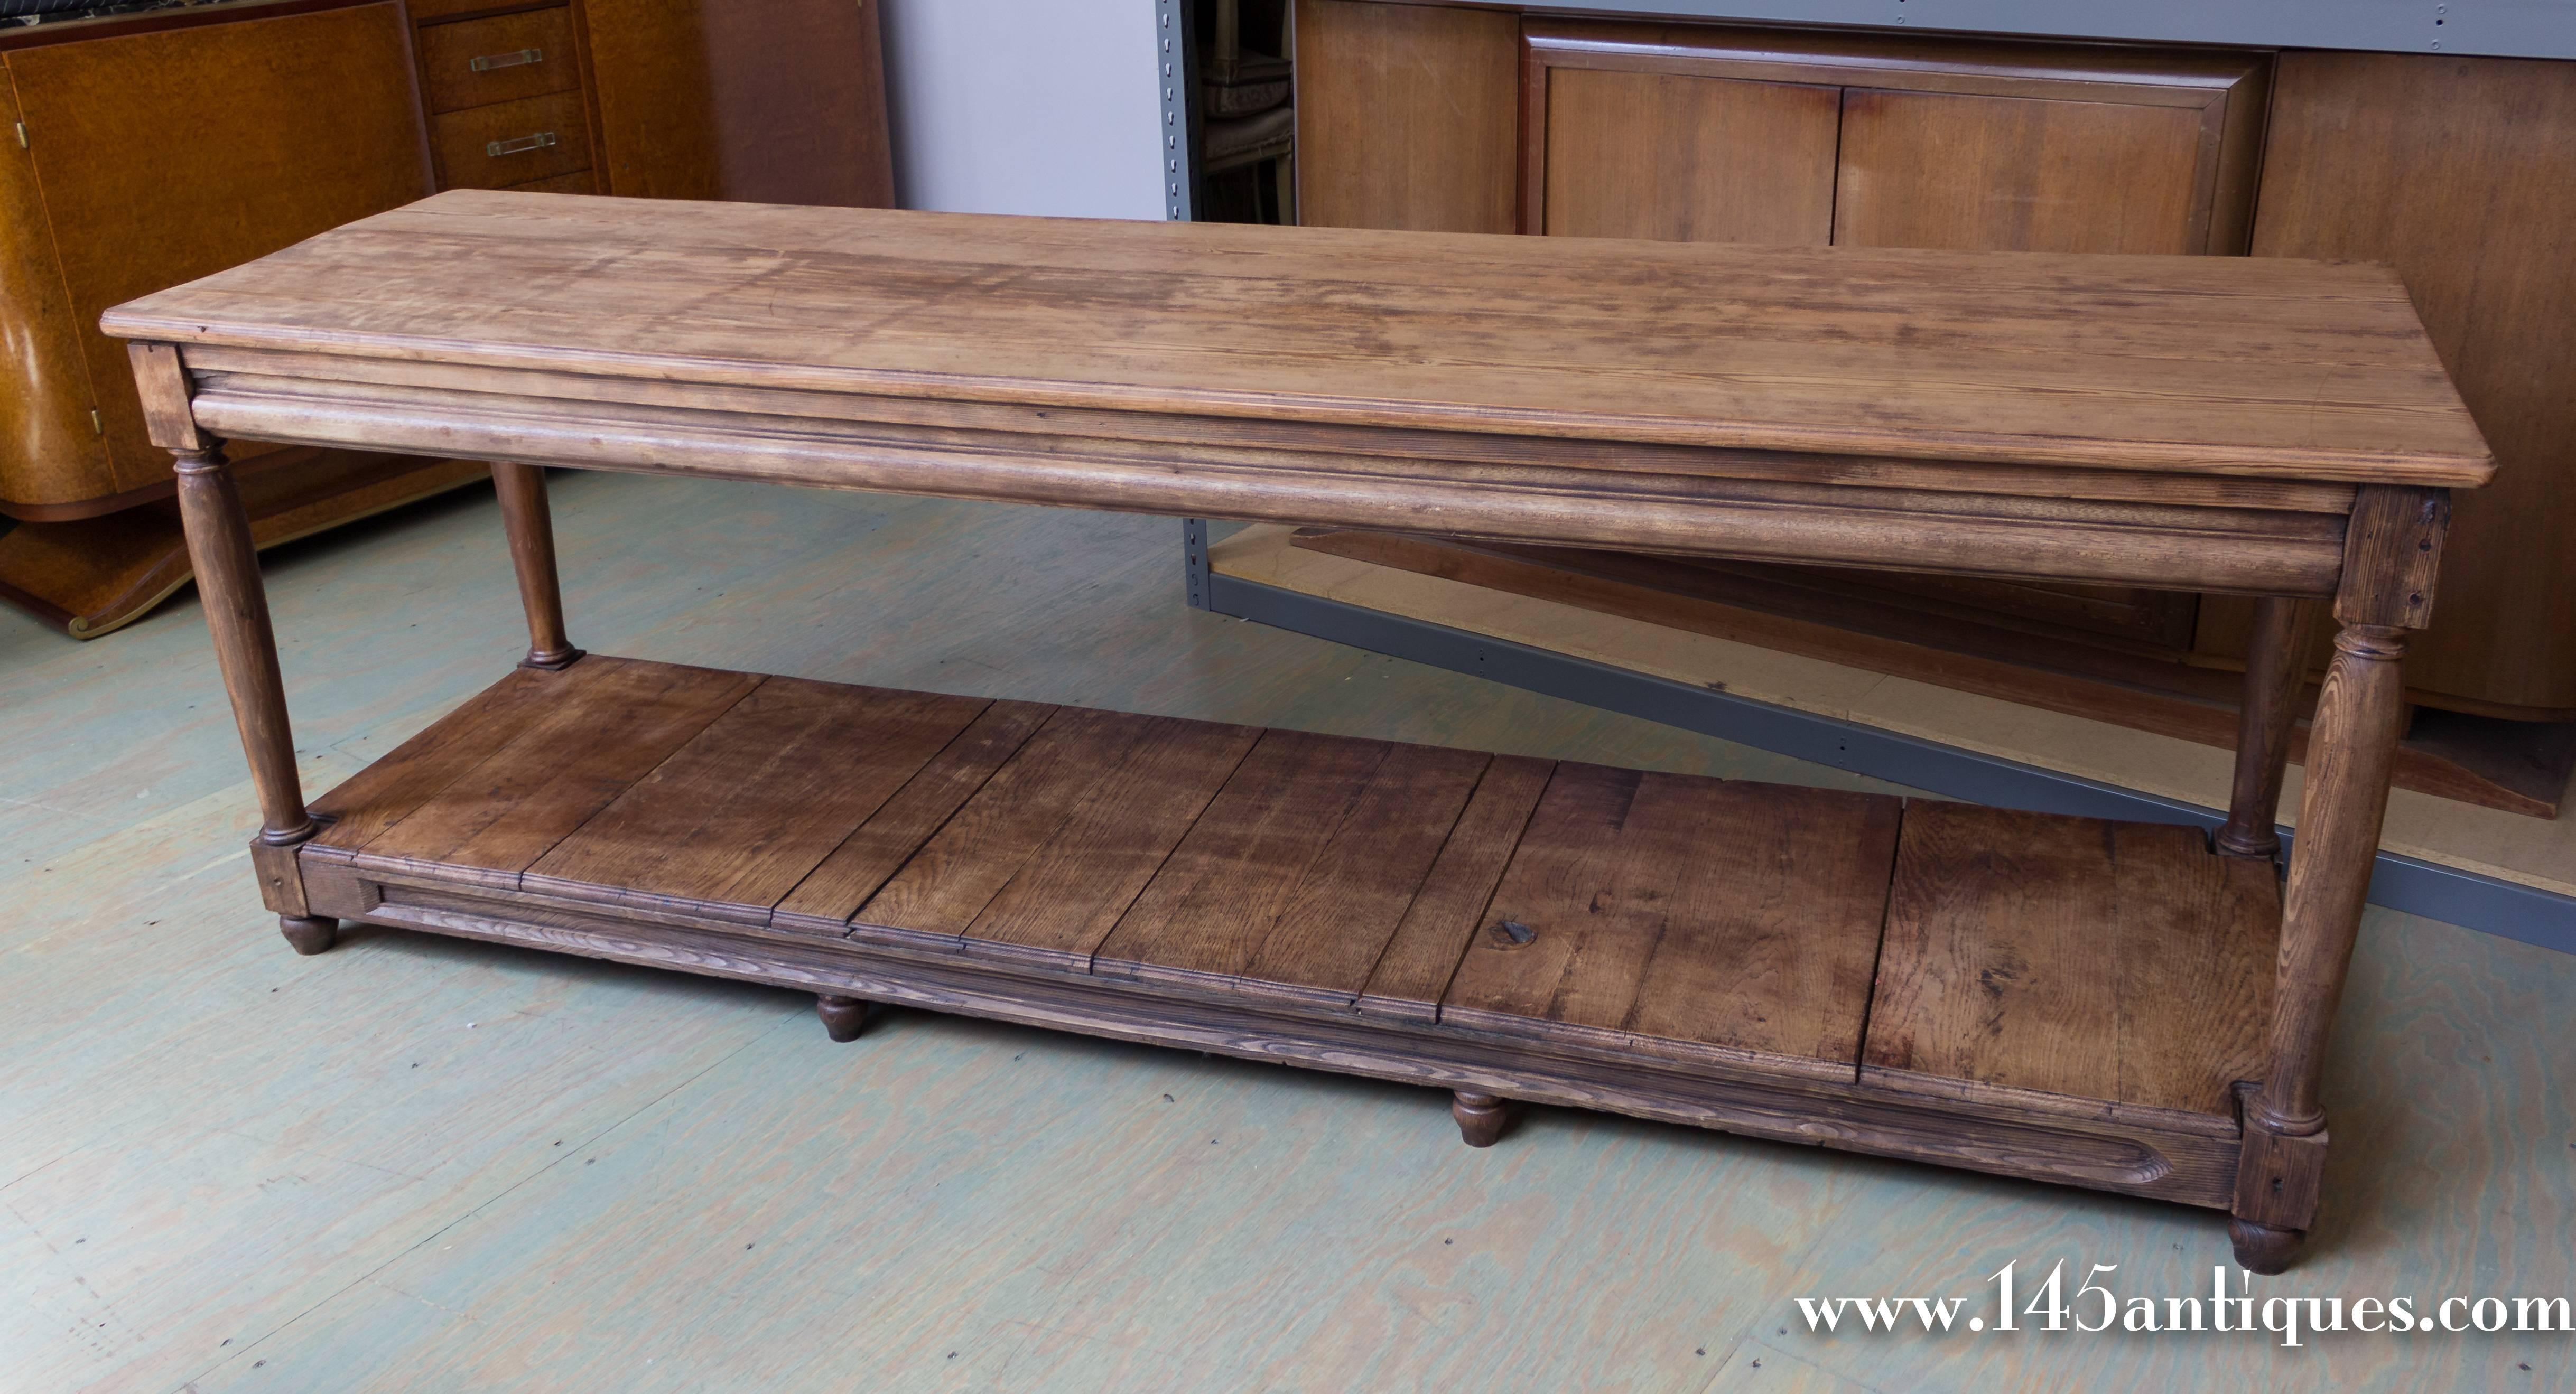 Large solid wood pine draper's table with tongue and groove jointed bottom shelf.